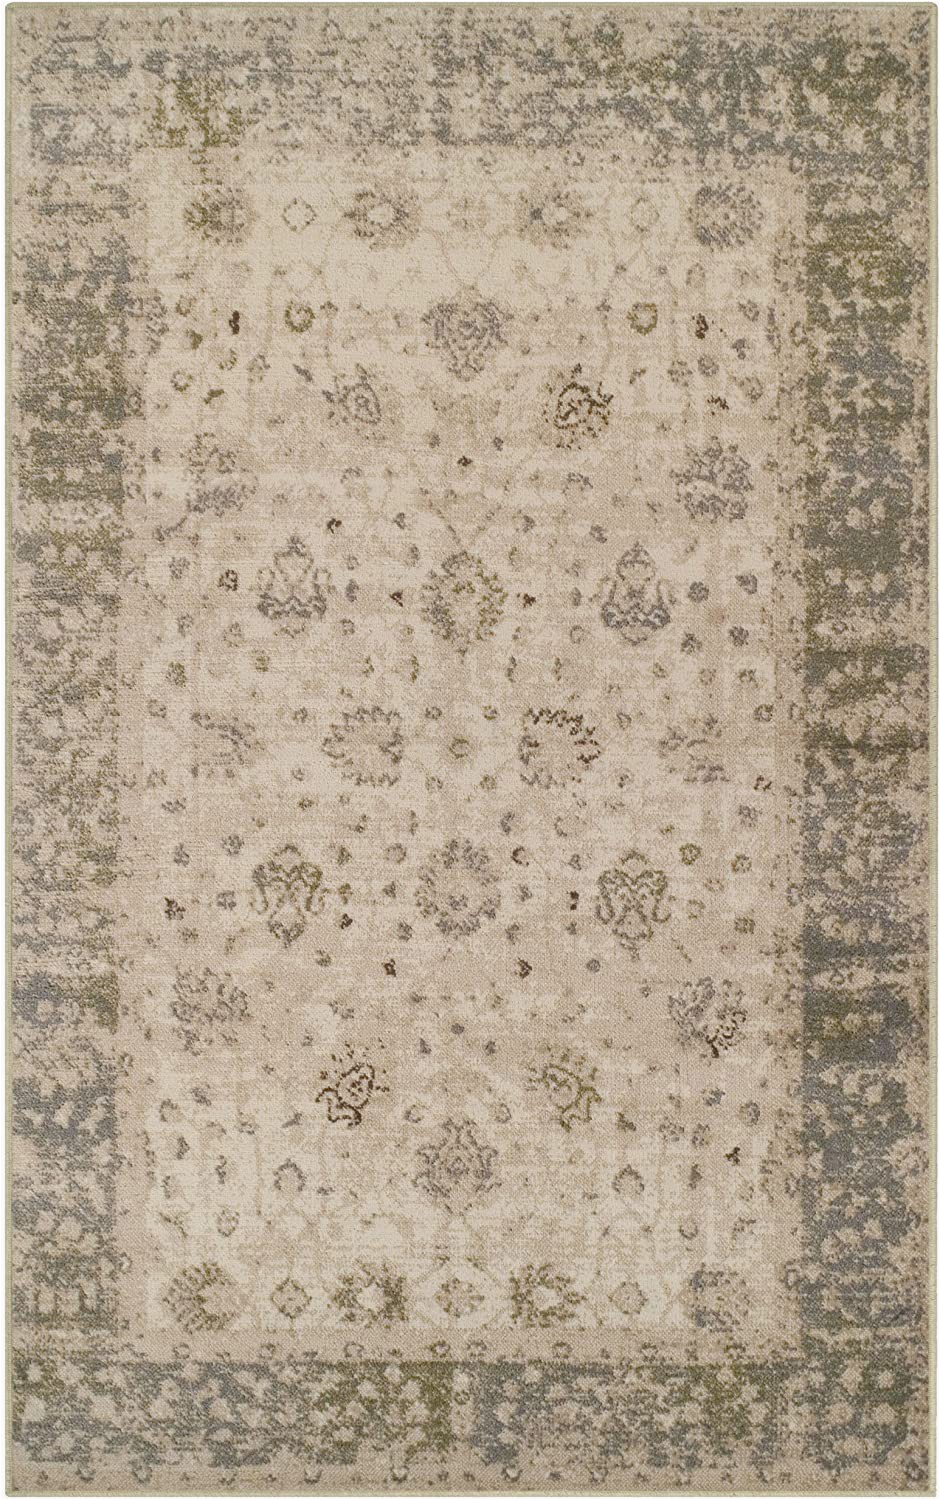 8 by 10 area Rugs Cheap Superior Designer Conventry Beige area Rug 8 X 10